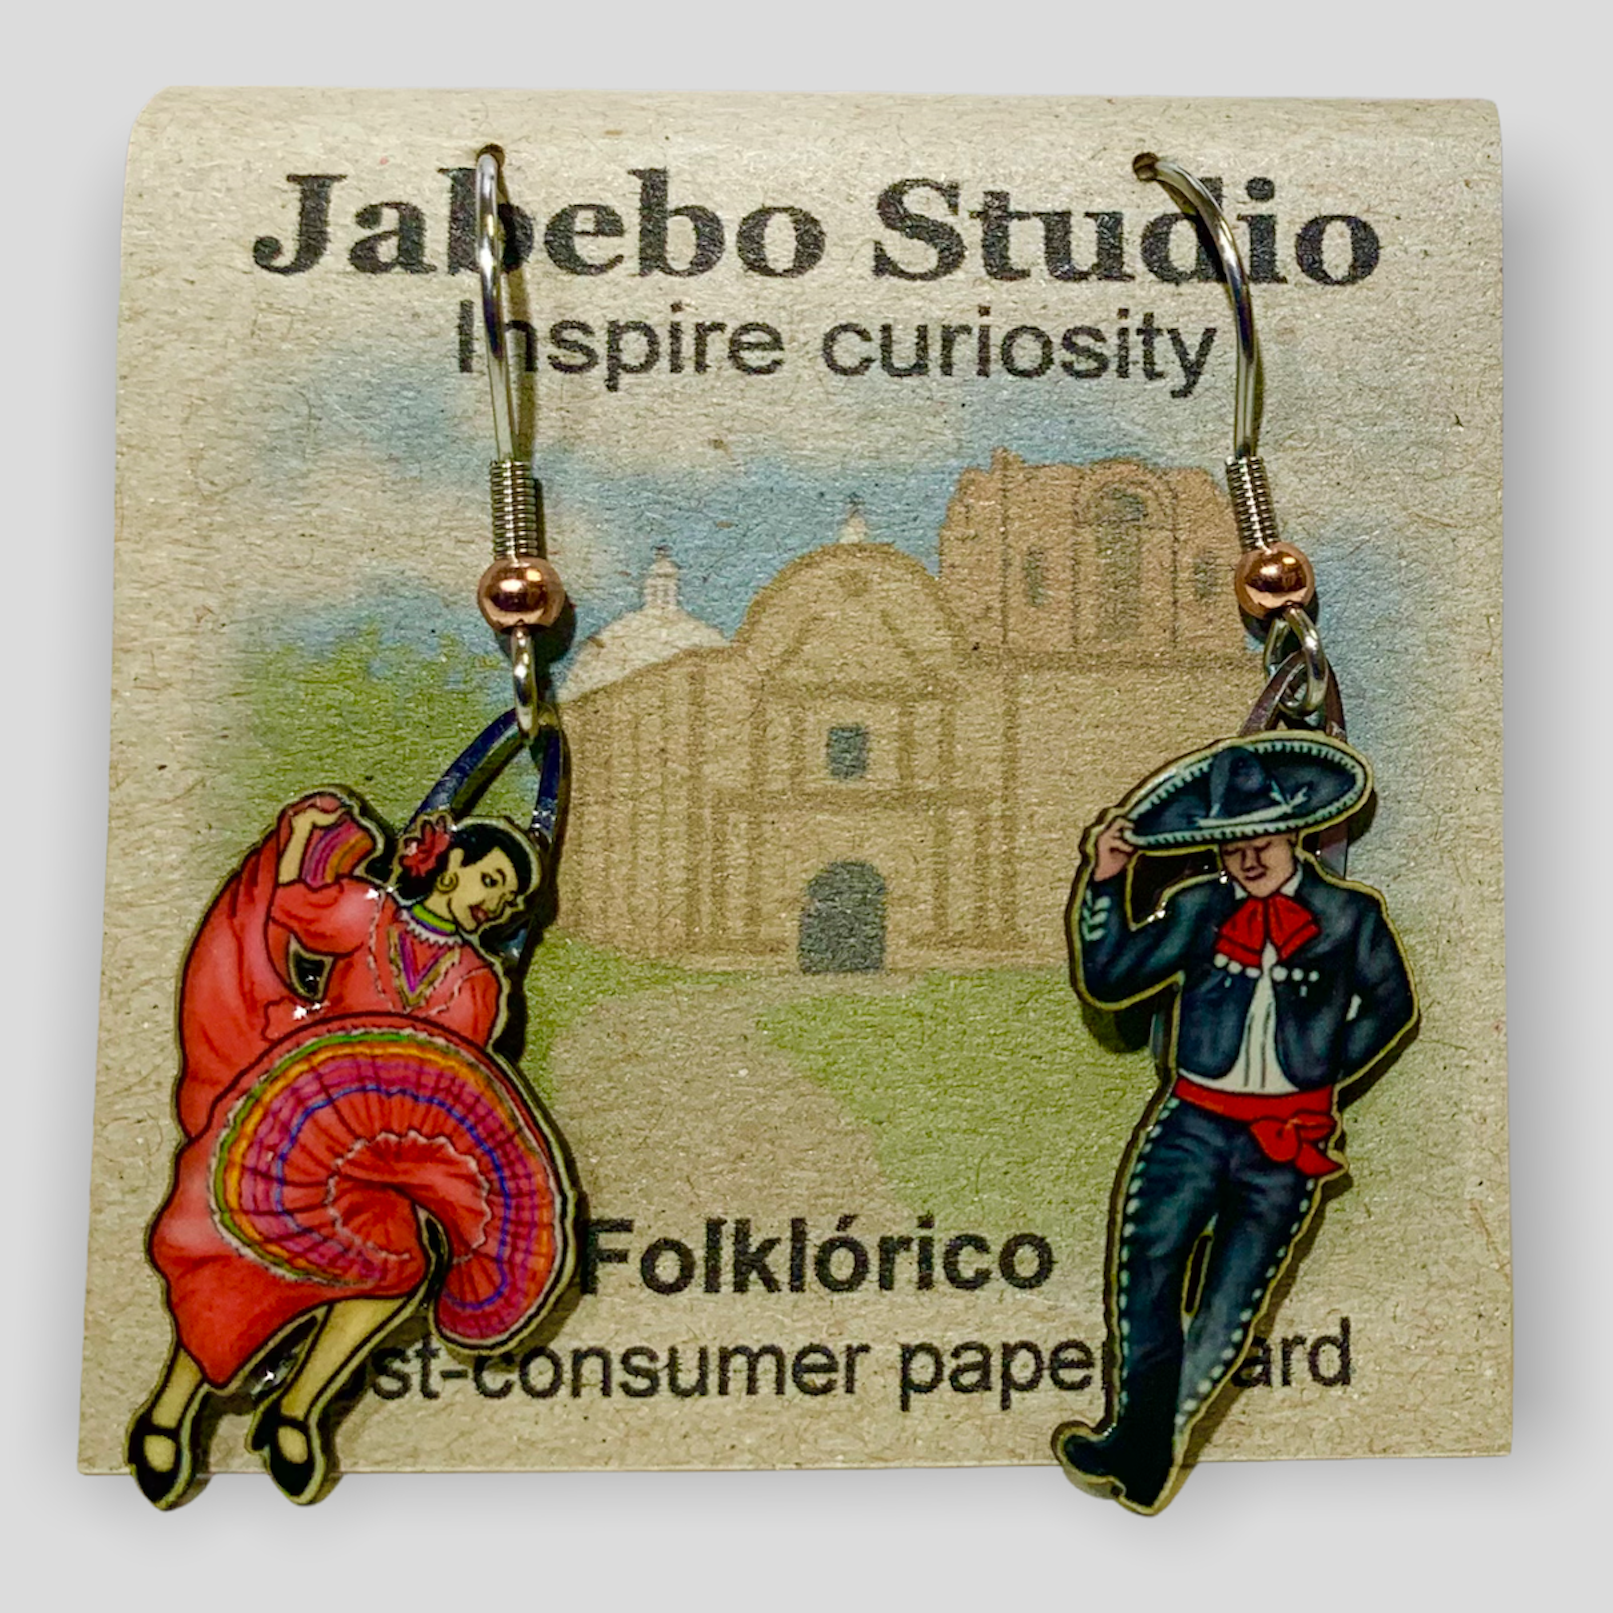 Picture shown is of 1 inch tall pair of earrings of Red Folklorico.